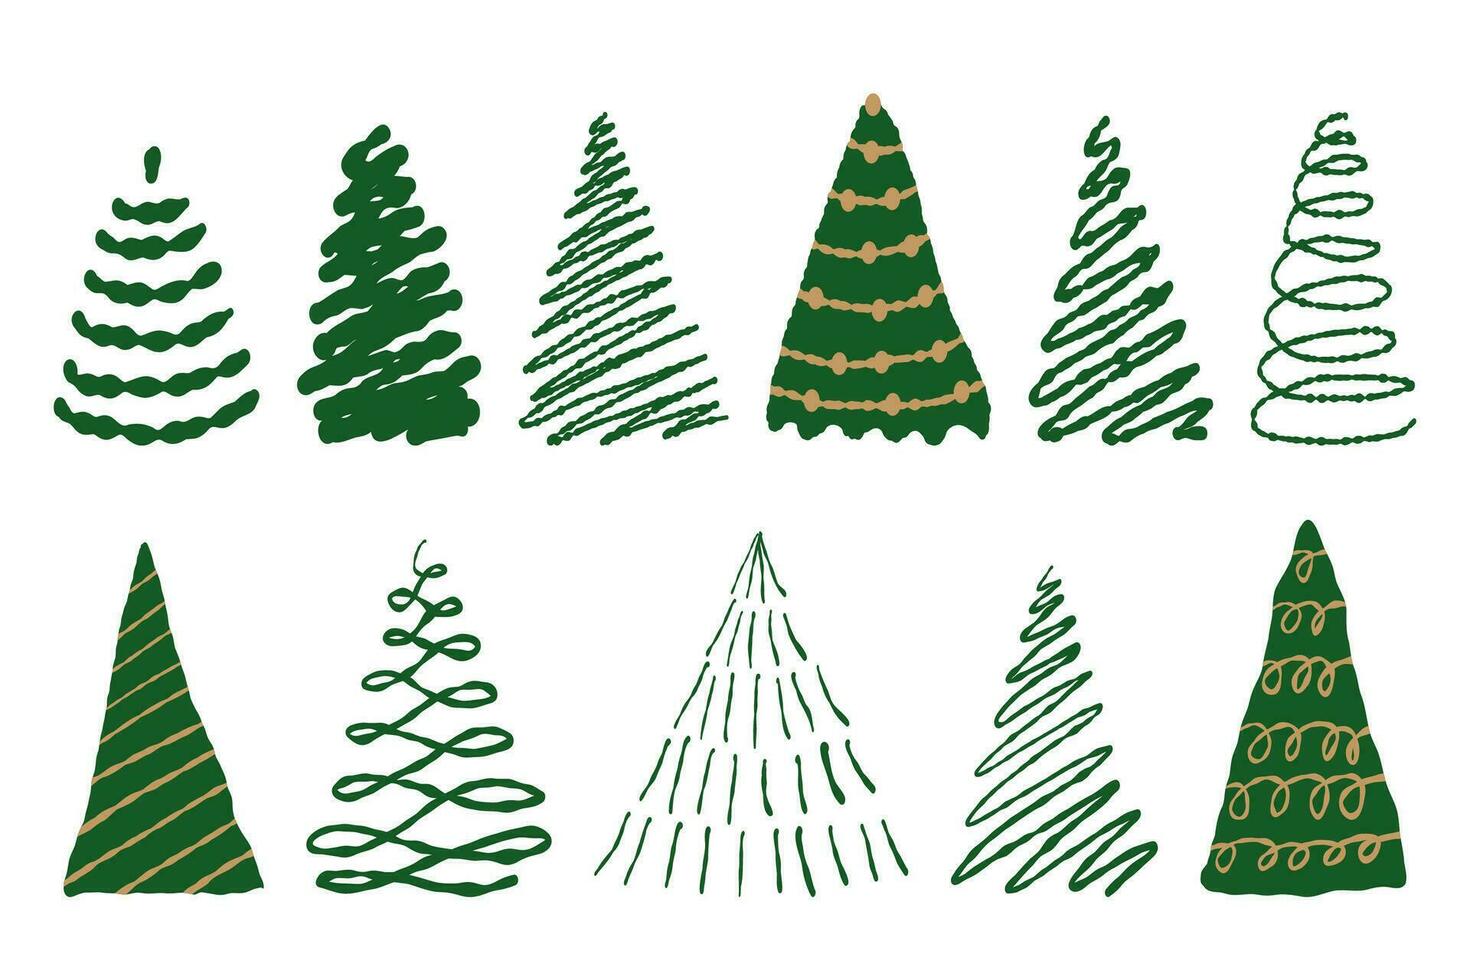 Christmas trees vector set in doodle minimalistic style, for greeting card, invitation, banner, web. Green, gold colors on a white background